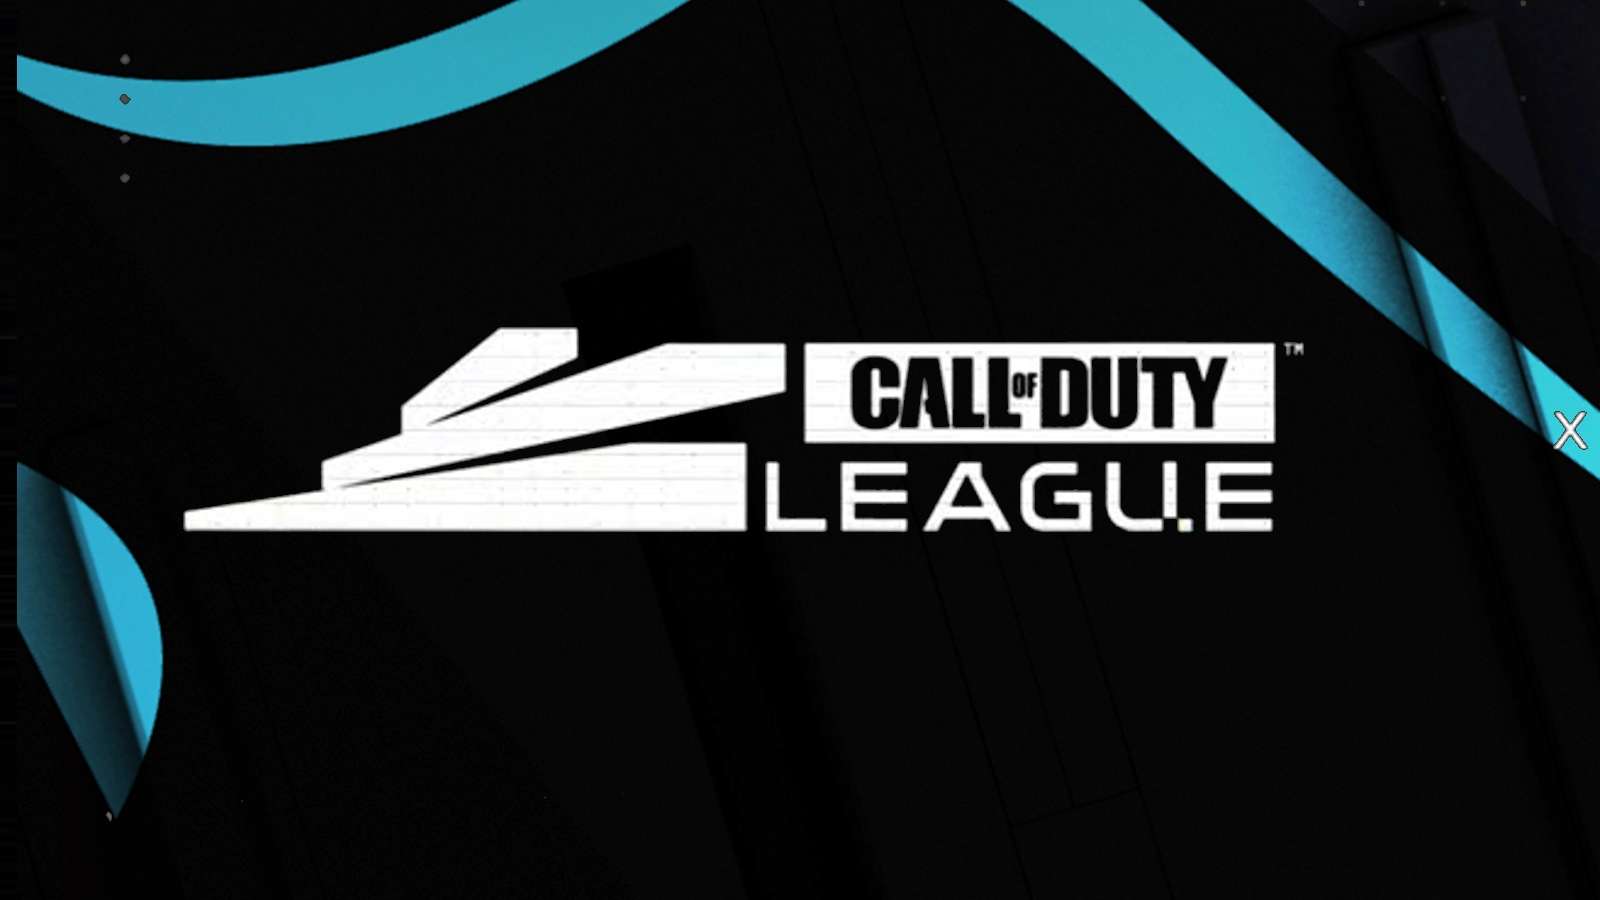 call of duty league logo with background